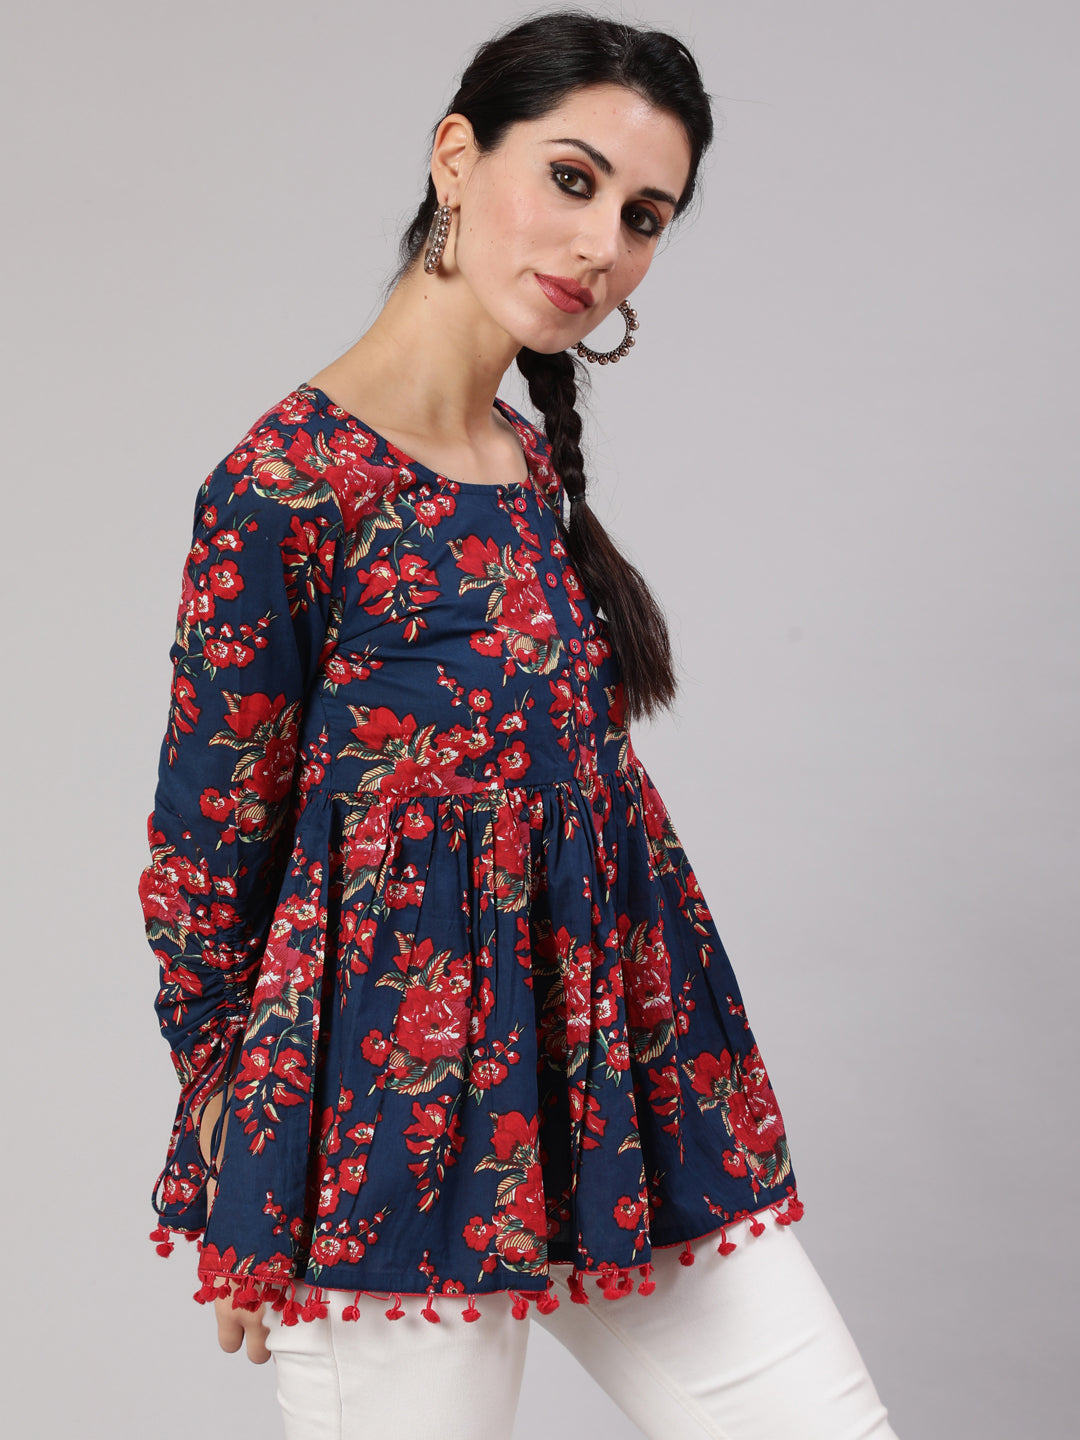 Navy Blue Floral Printed Gathered Tunic